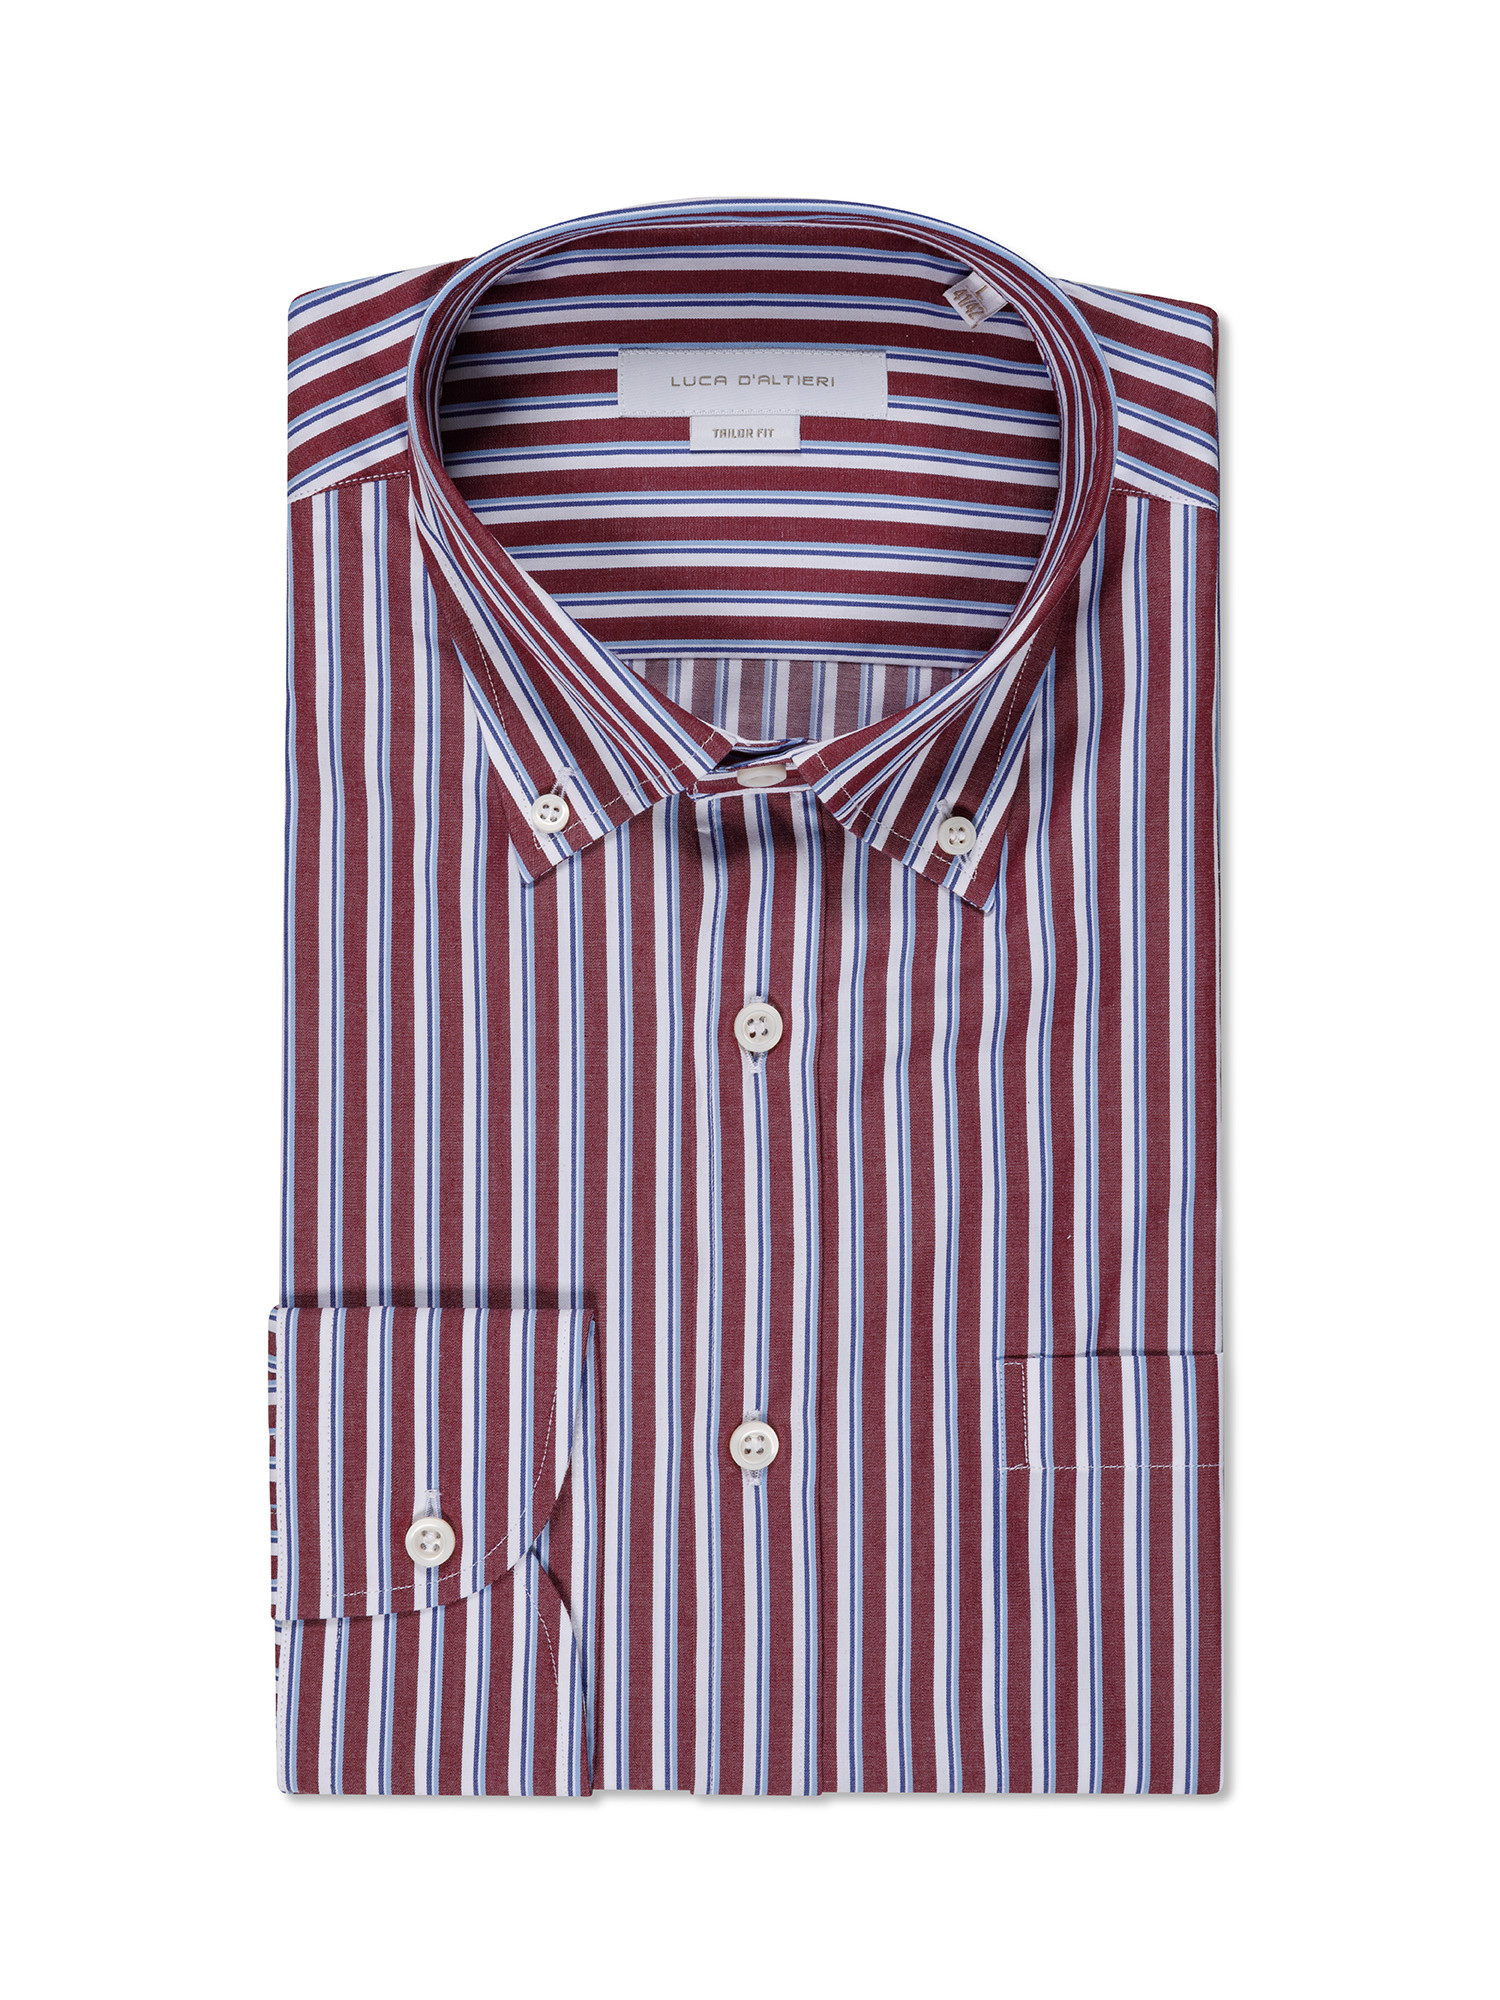 Luca D'Altieri - Camicia a righe tailor fit in puro cotone, Rosso bordeaux, large image number 0